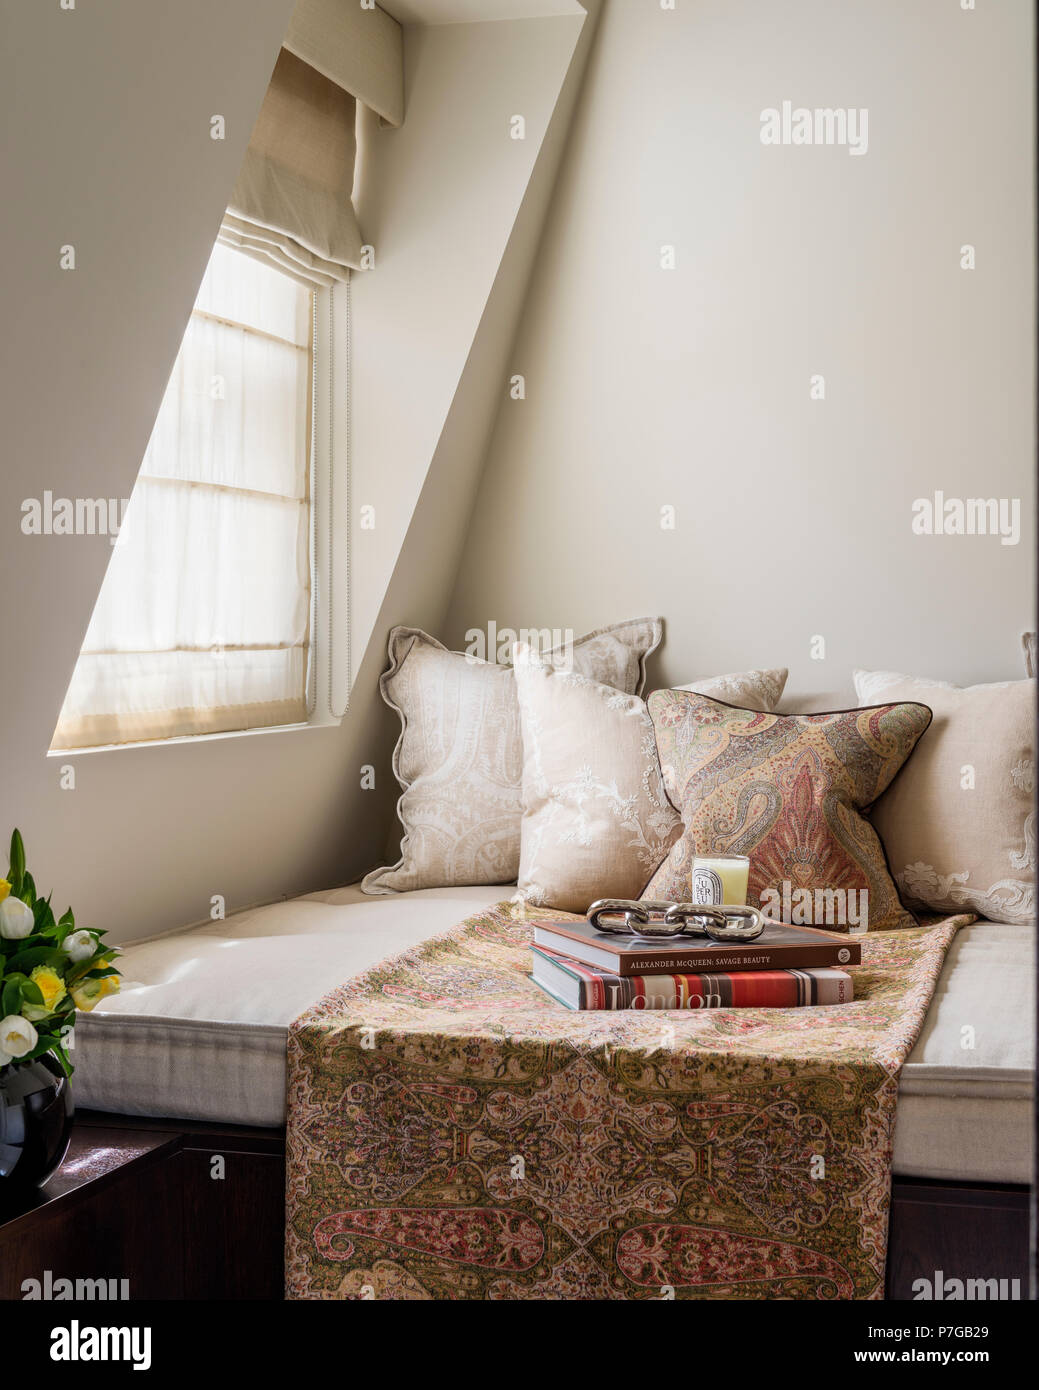 Daybed under window Stock Photo